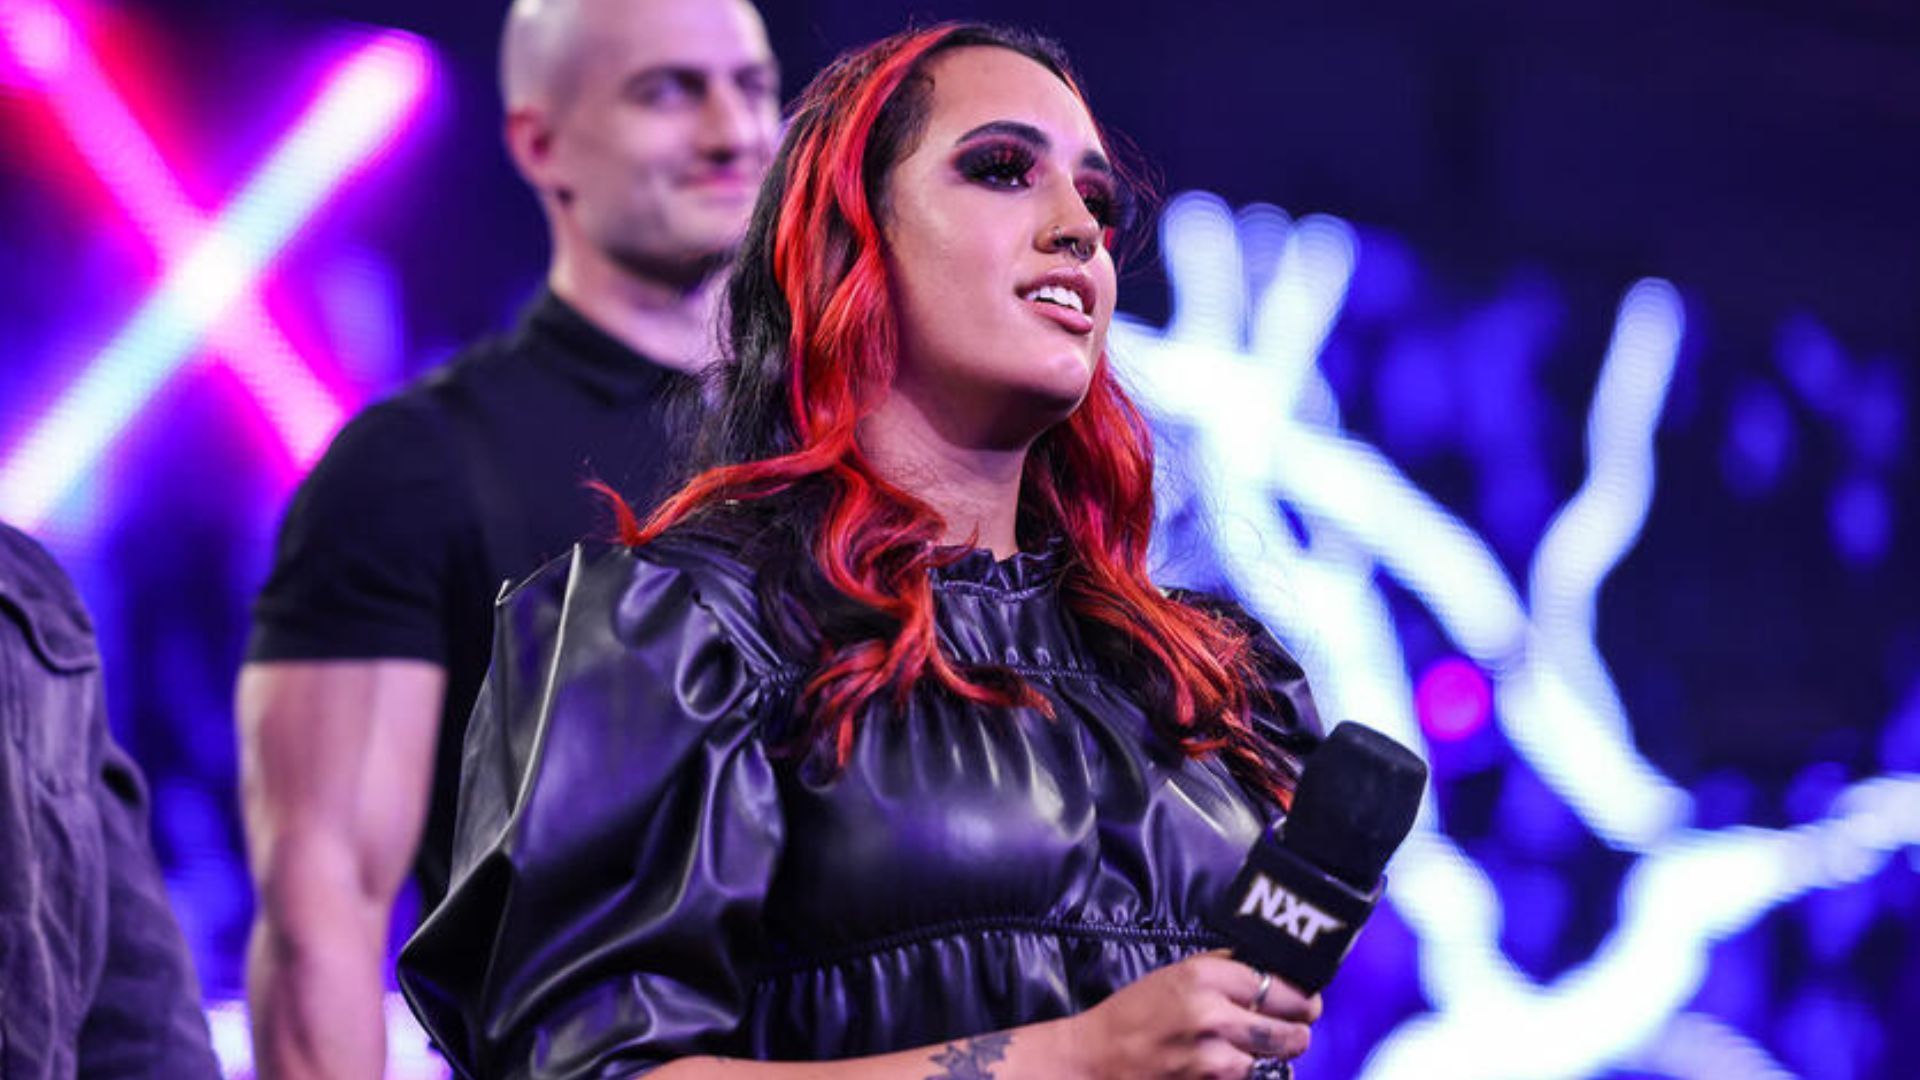 Ava is the General Manager of NXT.